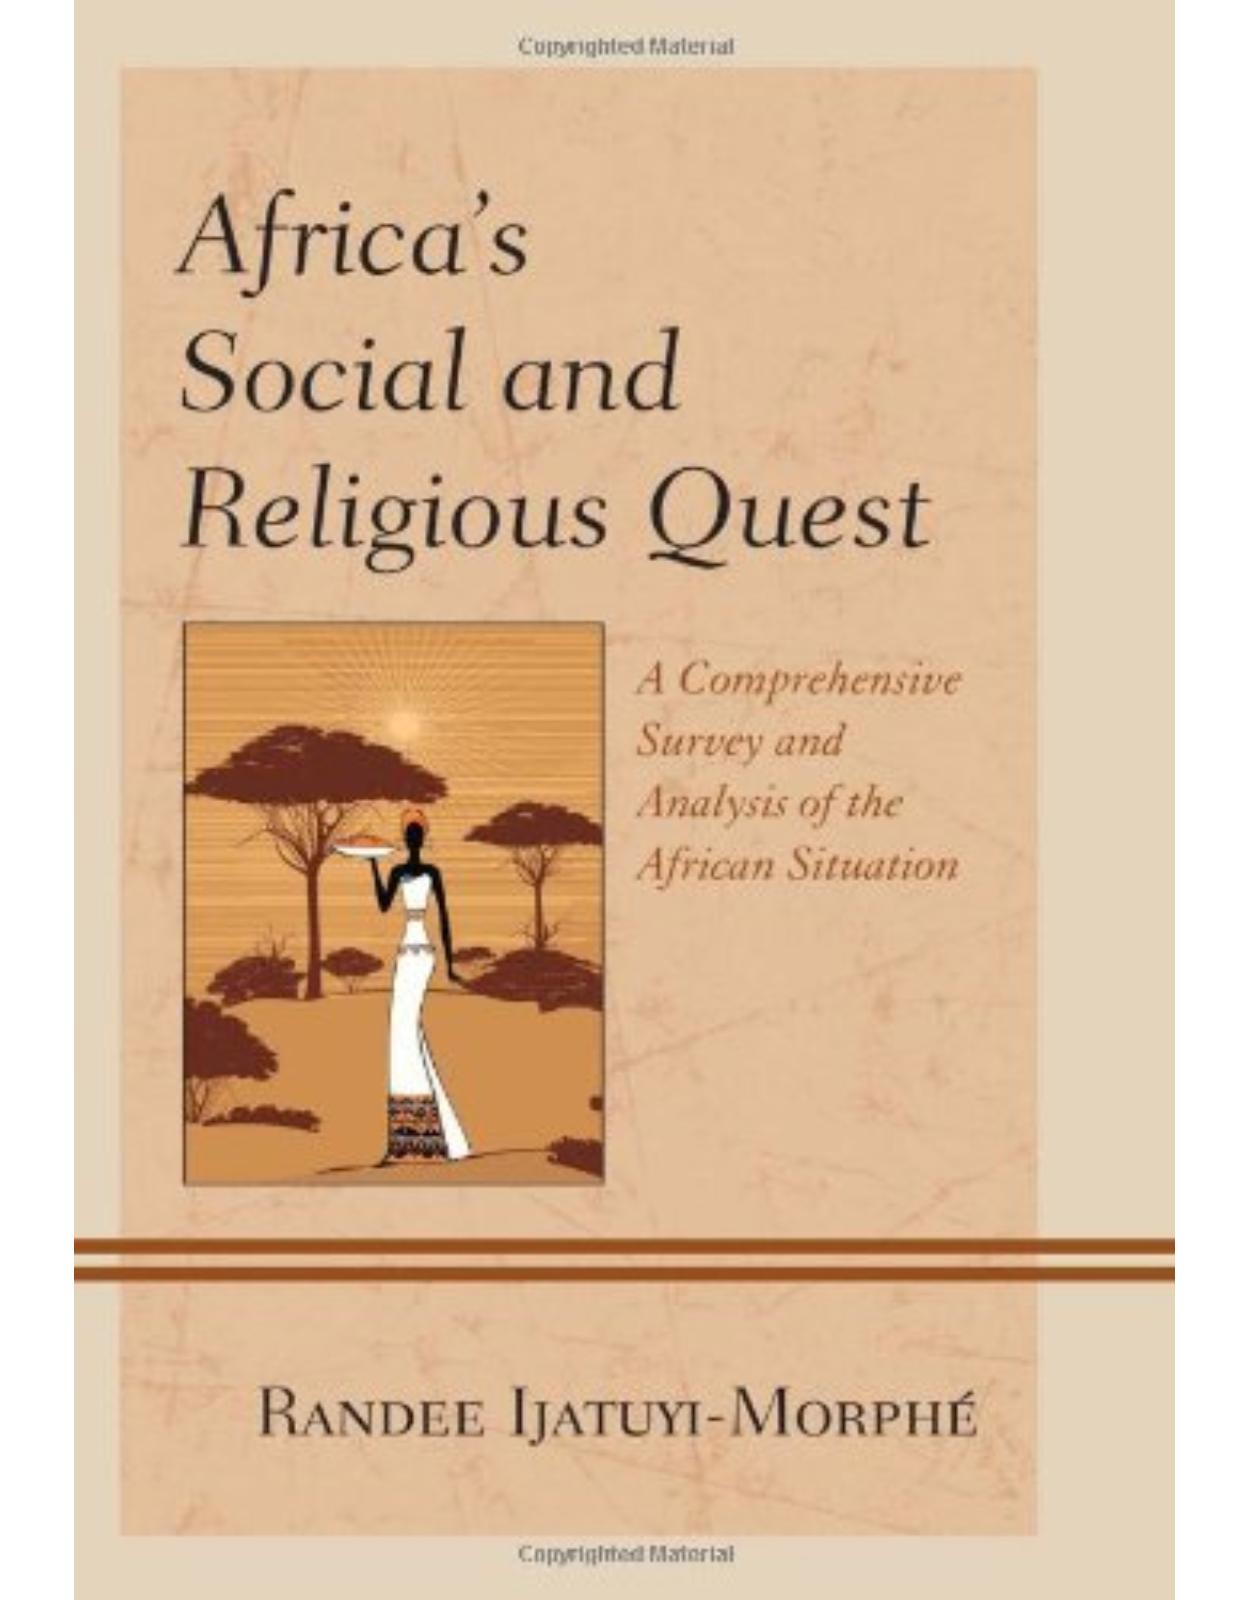 AfricaÂ’s Social and Religious Quest: A Comprehensive Survey and Analysis of the African Situation